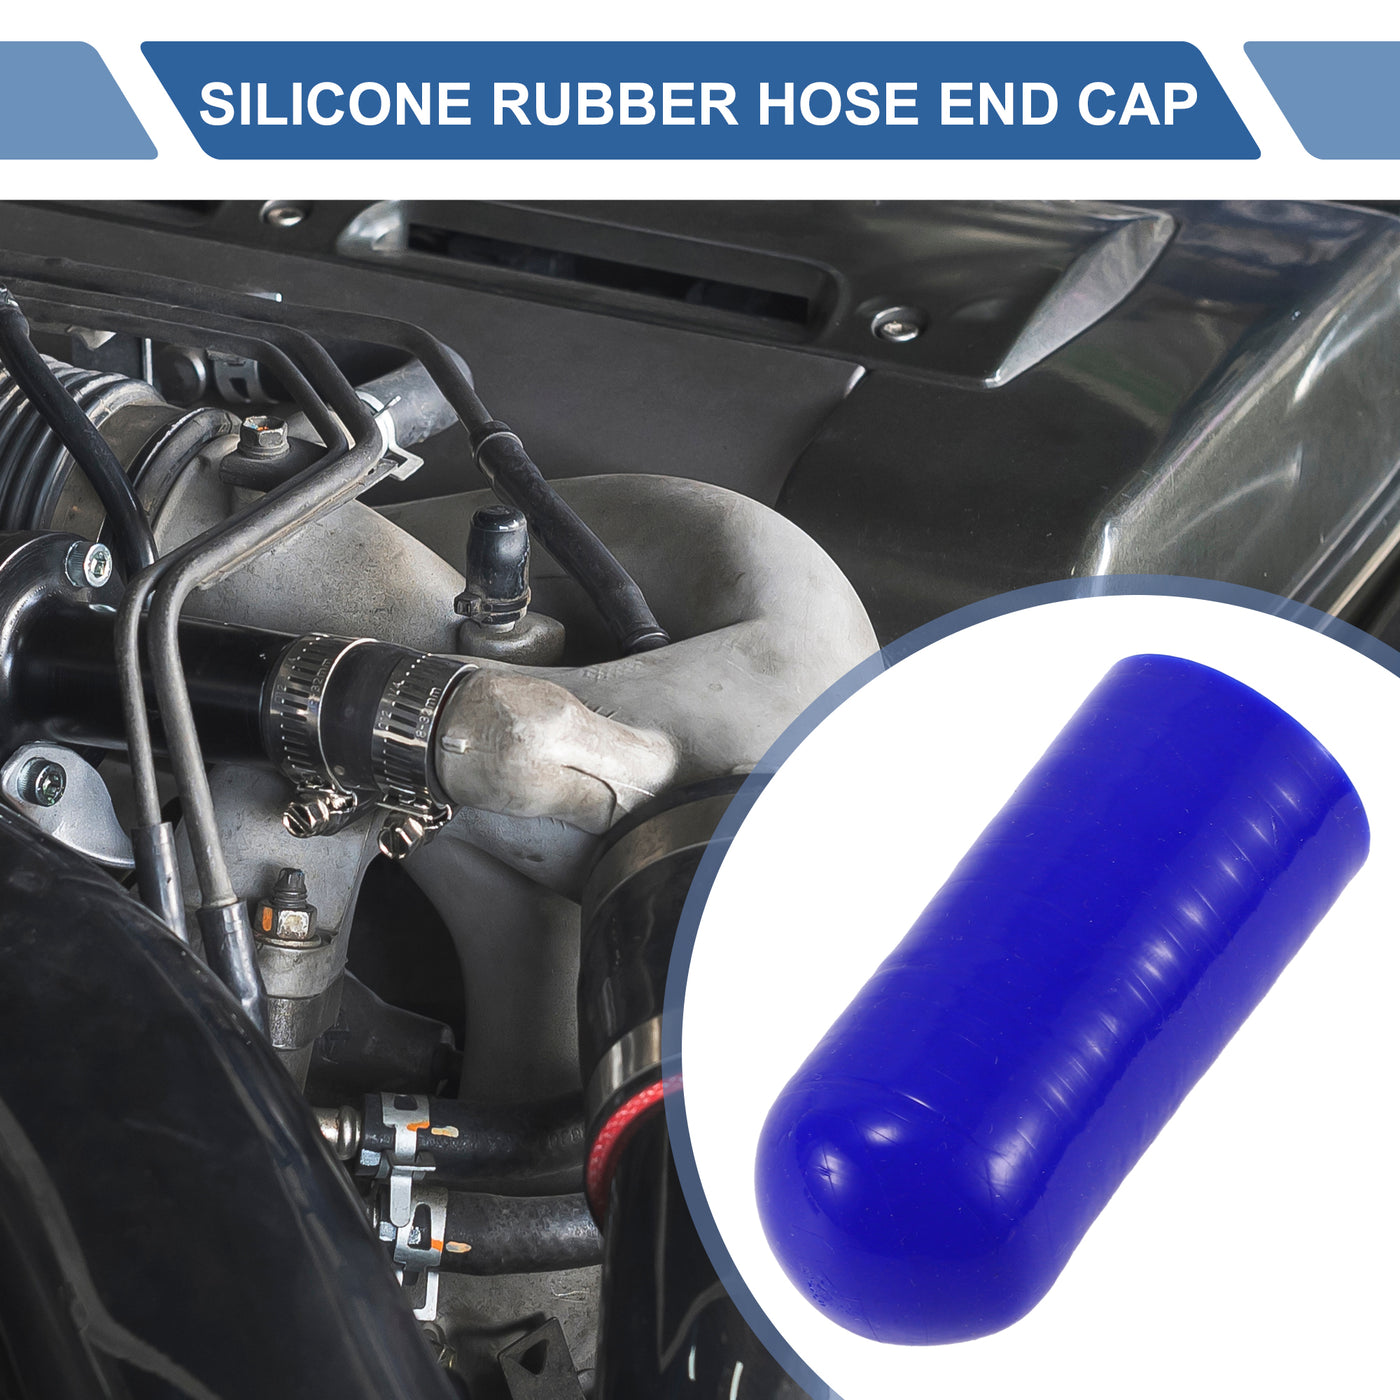 X AUTOHAUX 1 Pcs 60mm Length 25mm/0.98" ID Blue Car Silicone Rubber Hose End Cap with Clamp Silicone Reinforced Blanking Cap for Bypass Tube Universal